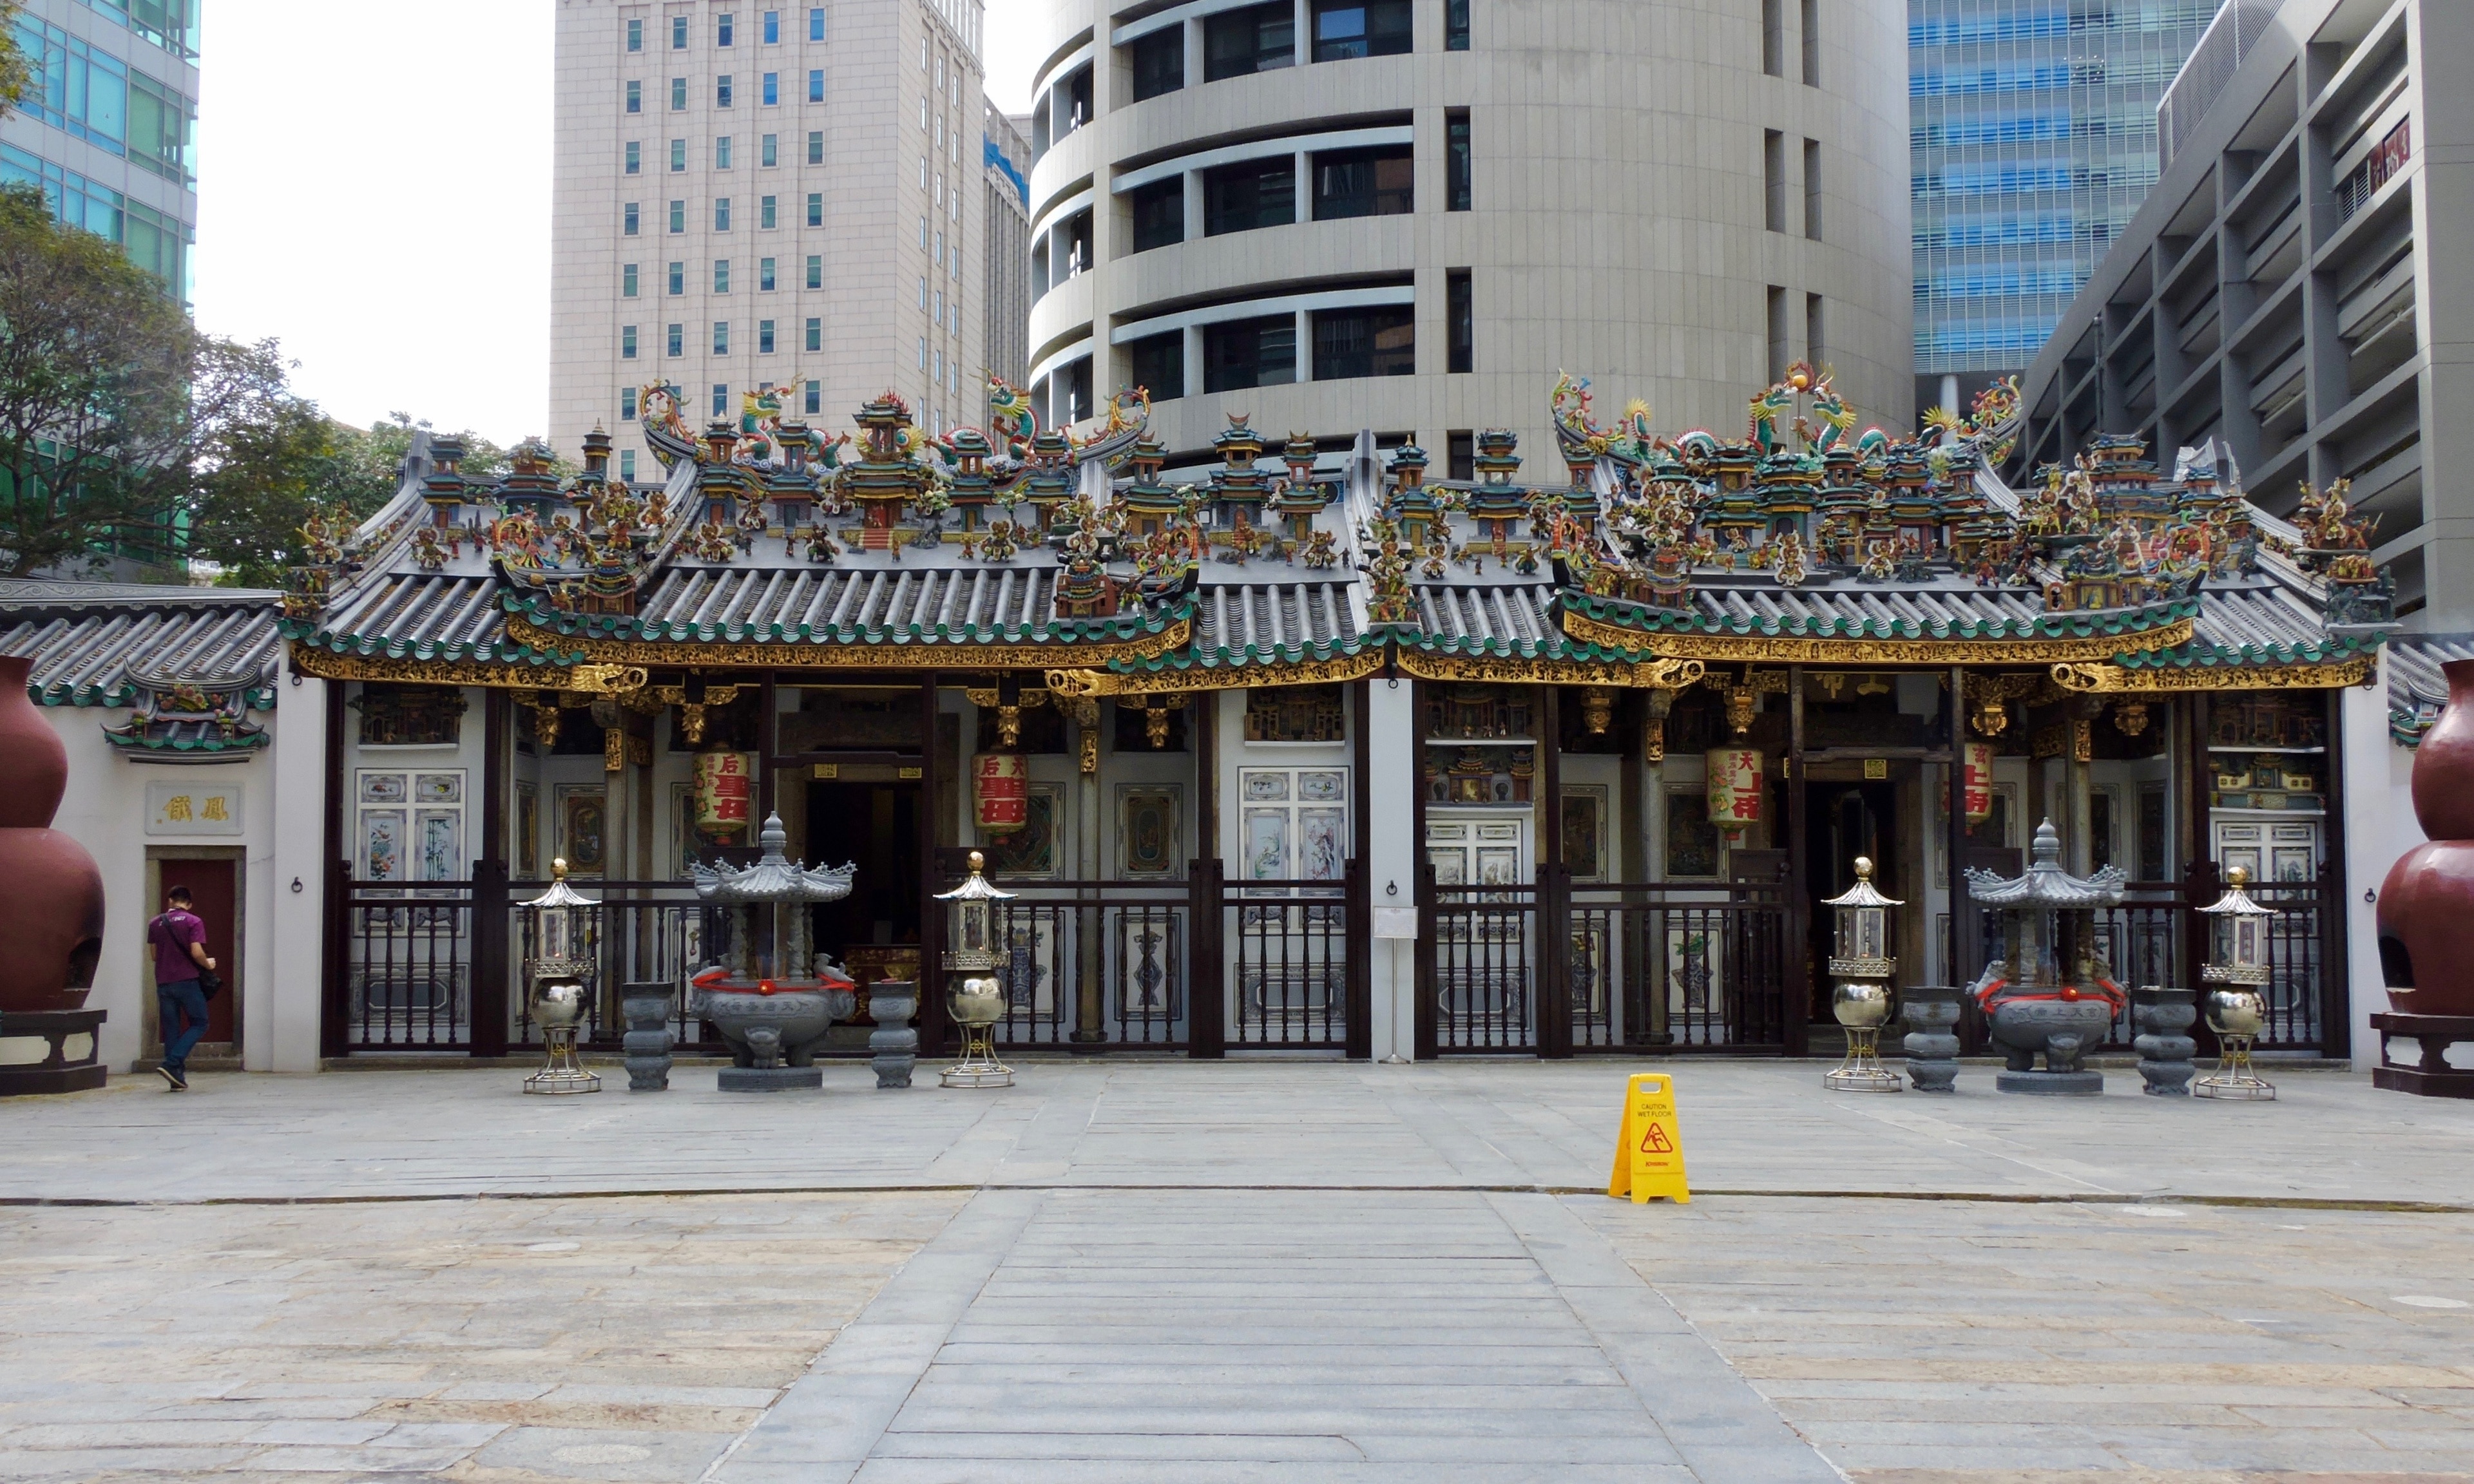 Yueh Hai Ching Temple (Traditional Chinese 粵海清廟, Simplified Chinese 粤海清庙)[1], also known as the Wak Hai Cheng Bio from its Teochew pronunciation, is a Chinese temple in Singapore located in Raffles Place in Singapore's central business district. The temple, whose name literally means "Temple of the Calm Cantonese Sea", was the first stop for Chinese immigrants to Singapore in the early 19th century. (Wikipedia) (January 2015)

#Culture Photo Contest #Trovember #History